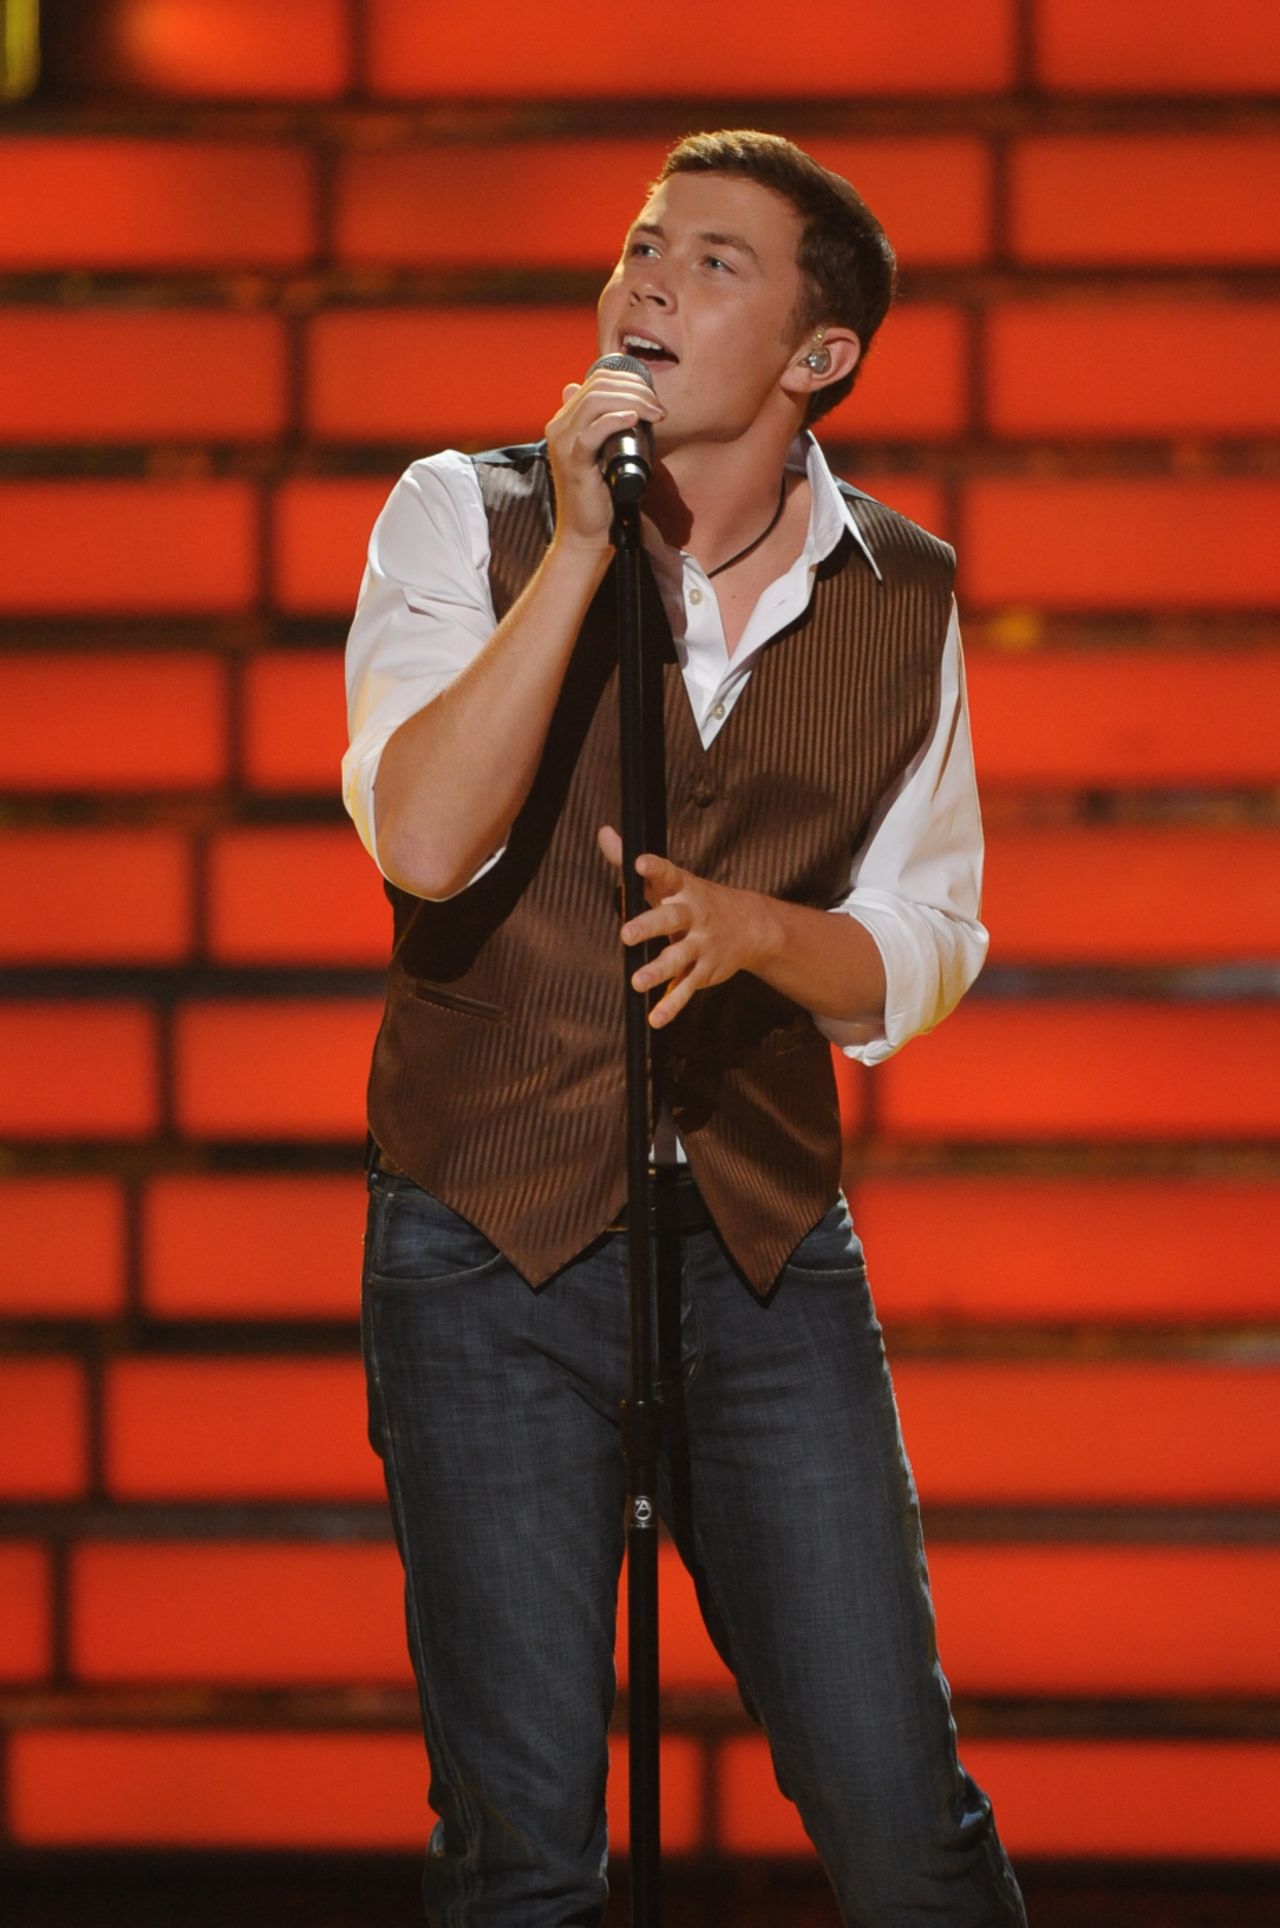 Since Scotty McCreery was crowned the winner of season 10 in 2011, the singer's debut album, "Clear As Day," has been certified platinum. He was named the Academy of Country Music's best new artist in 2012 and released his second studio album, "See You Tonight," in 2013. At the start of 2015, <a href="http://www.rollingstone.com/music/news/scotty-mccreery-trades-pop-for-classic-country-on-new-lp-20150105" target="_blank" target="_blank">McCreery announced</a> his next project would be classic country.